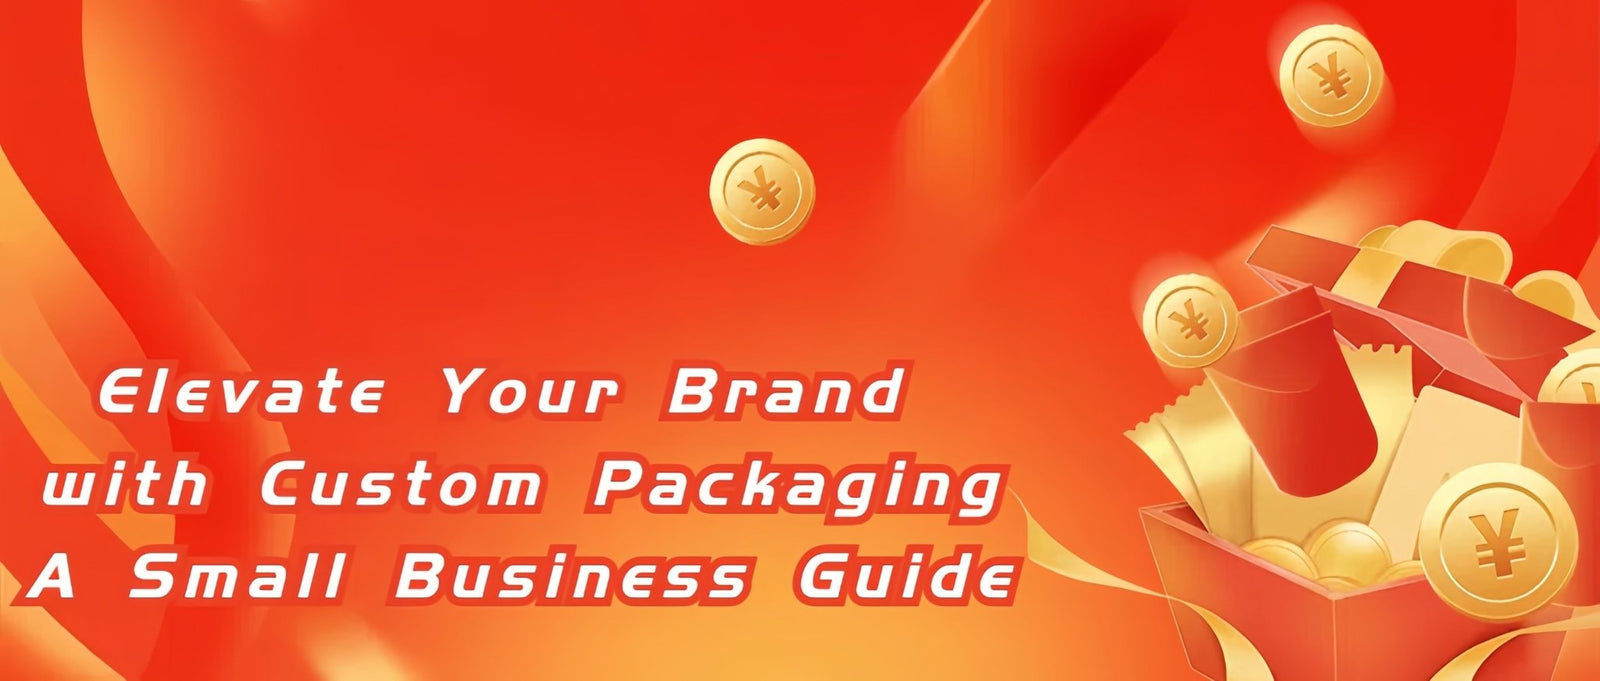 Elevate Your Brand with Custom Packaging: A Small Business Guide - LONGER